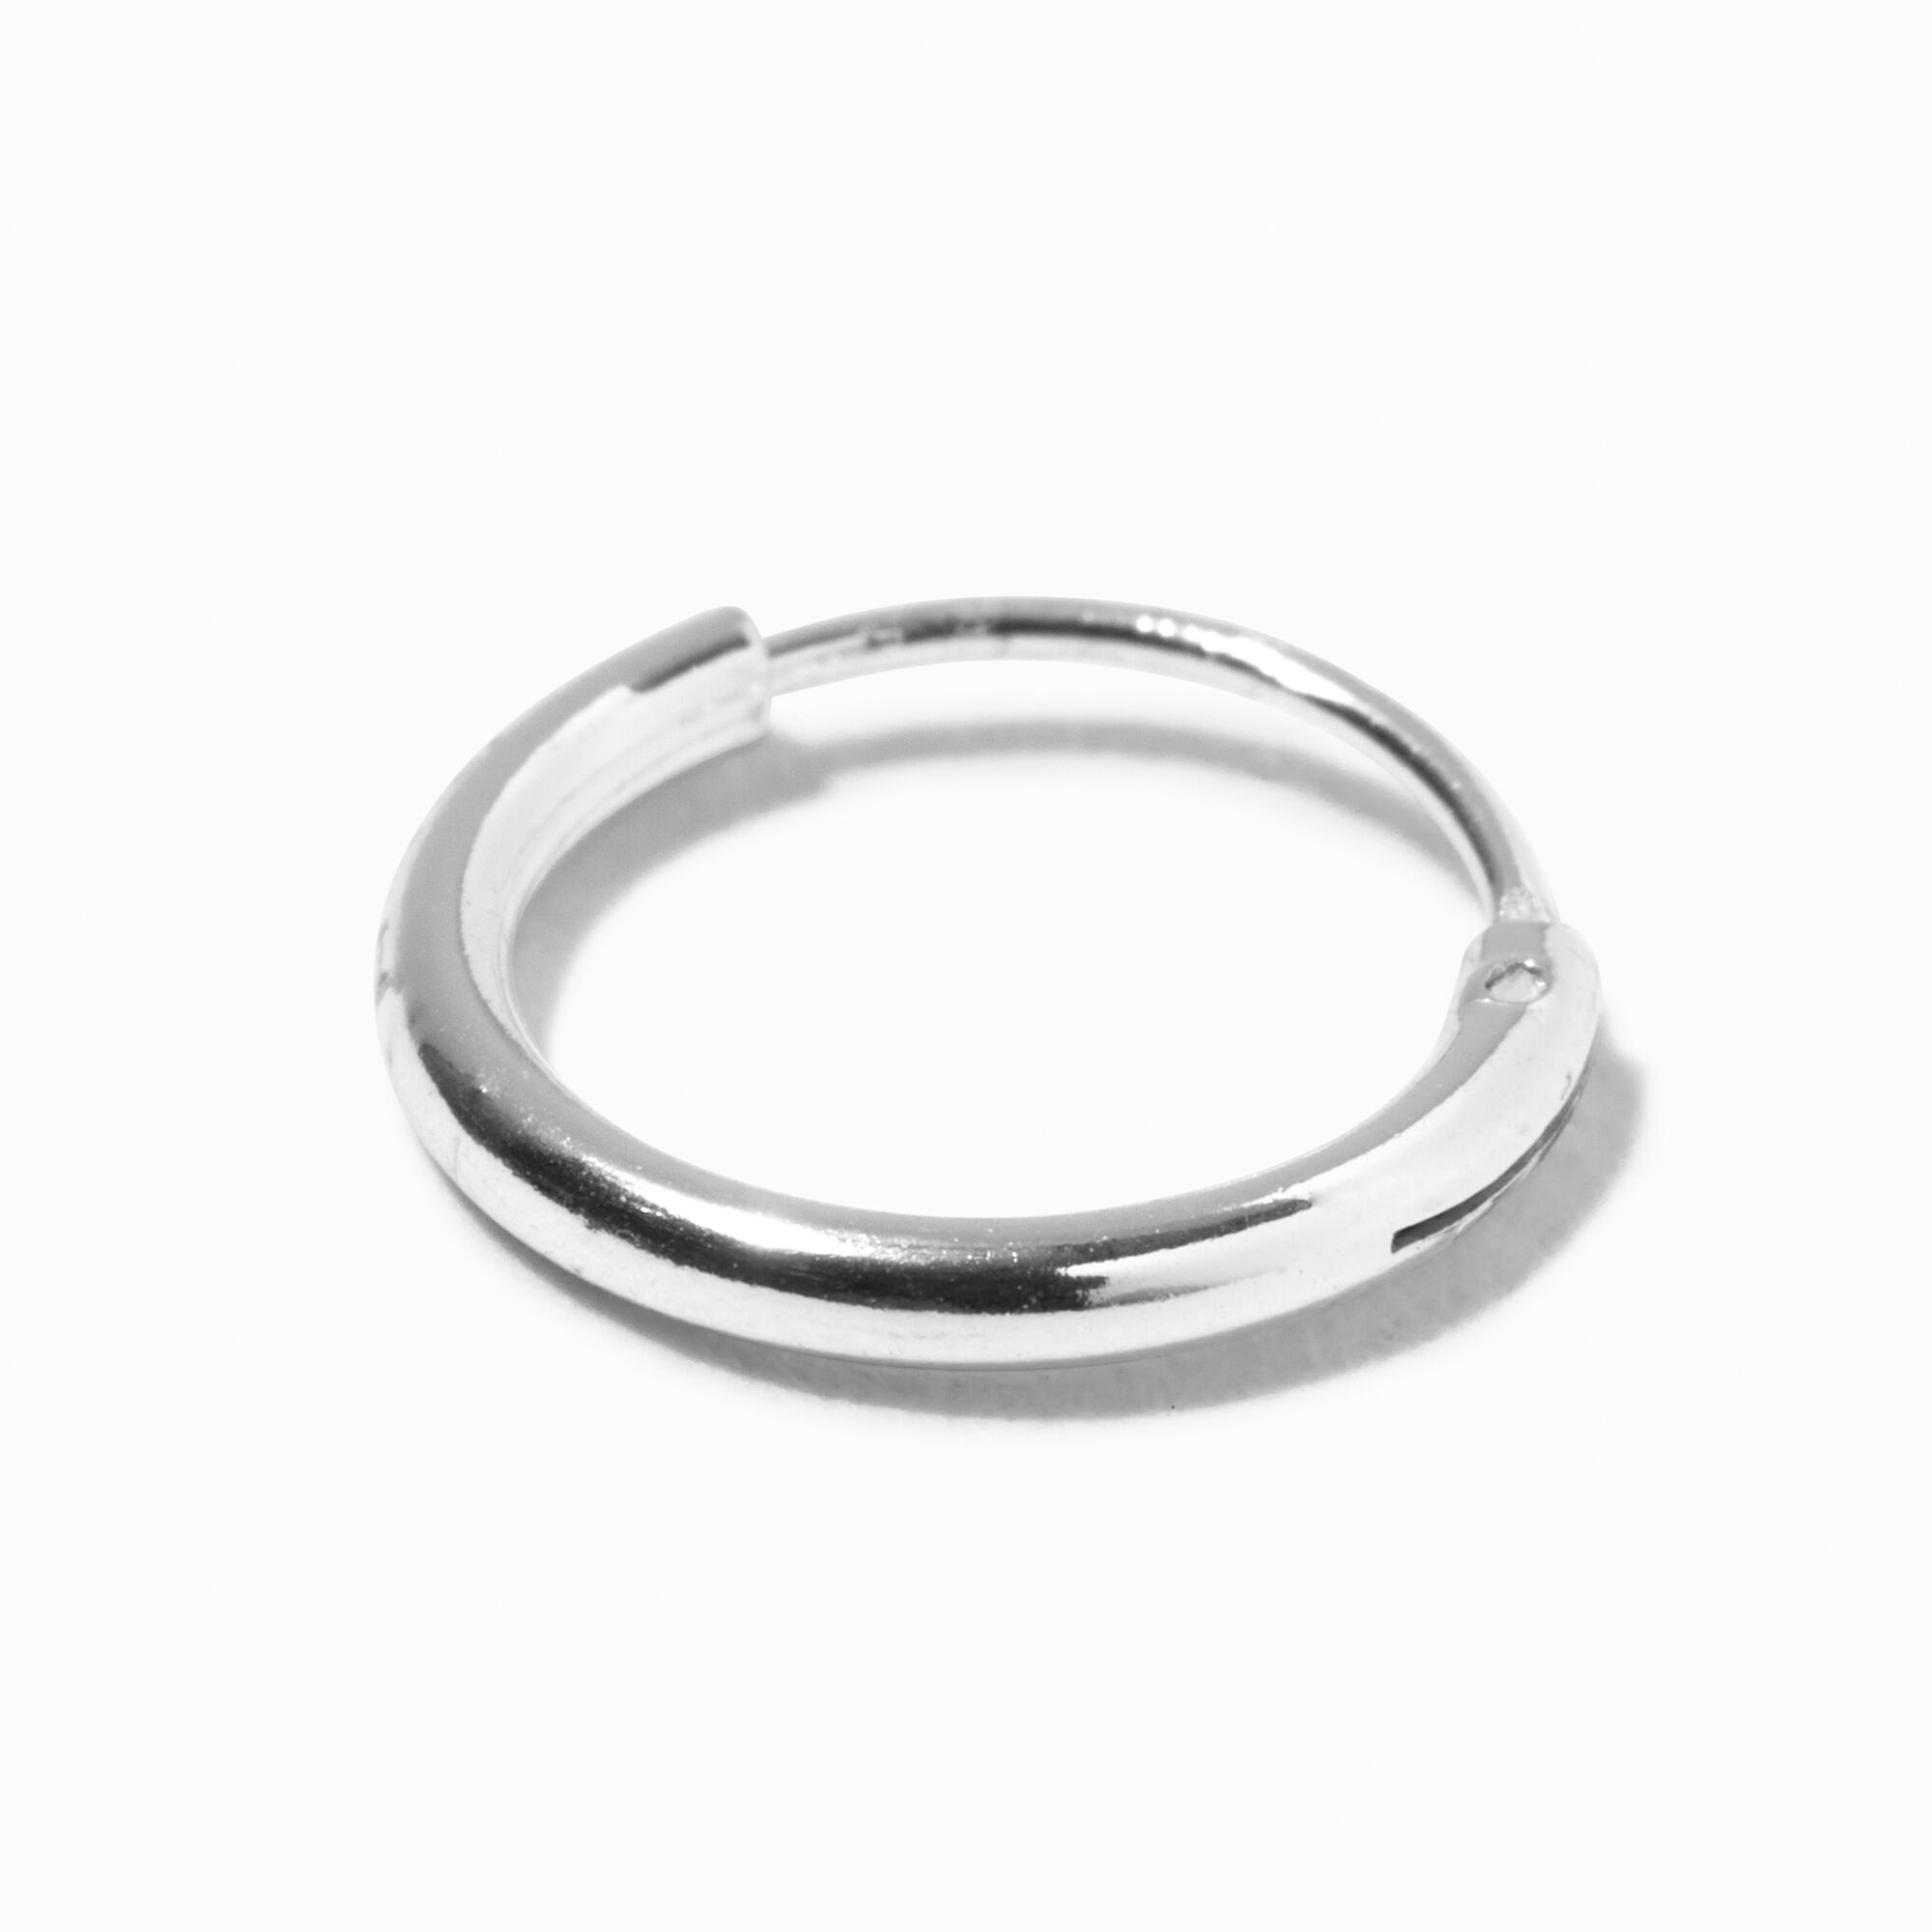 View Claires One 10MM Hoop Earring Silver information